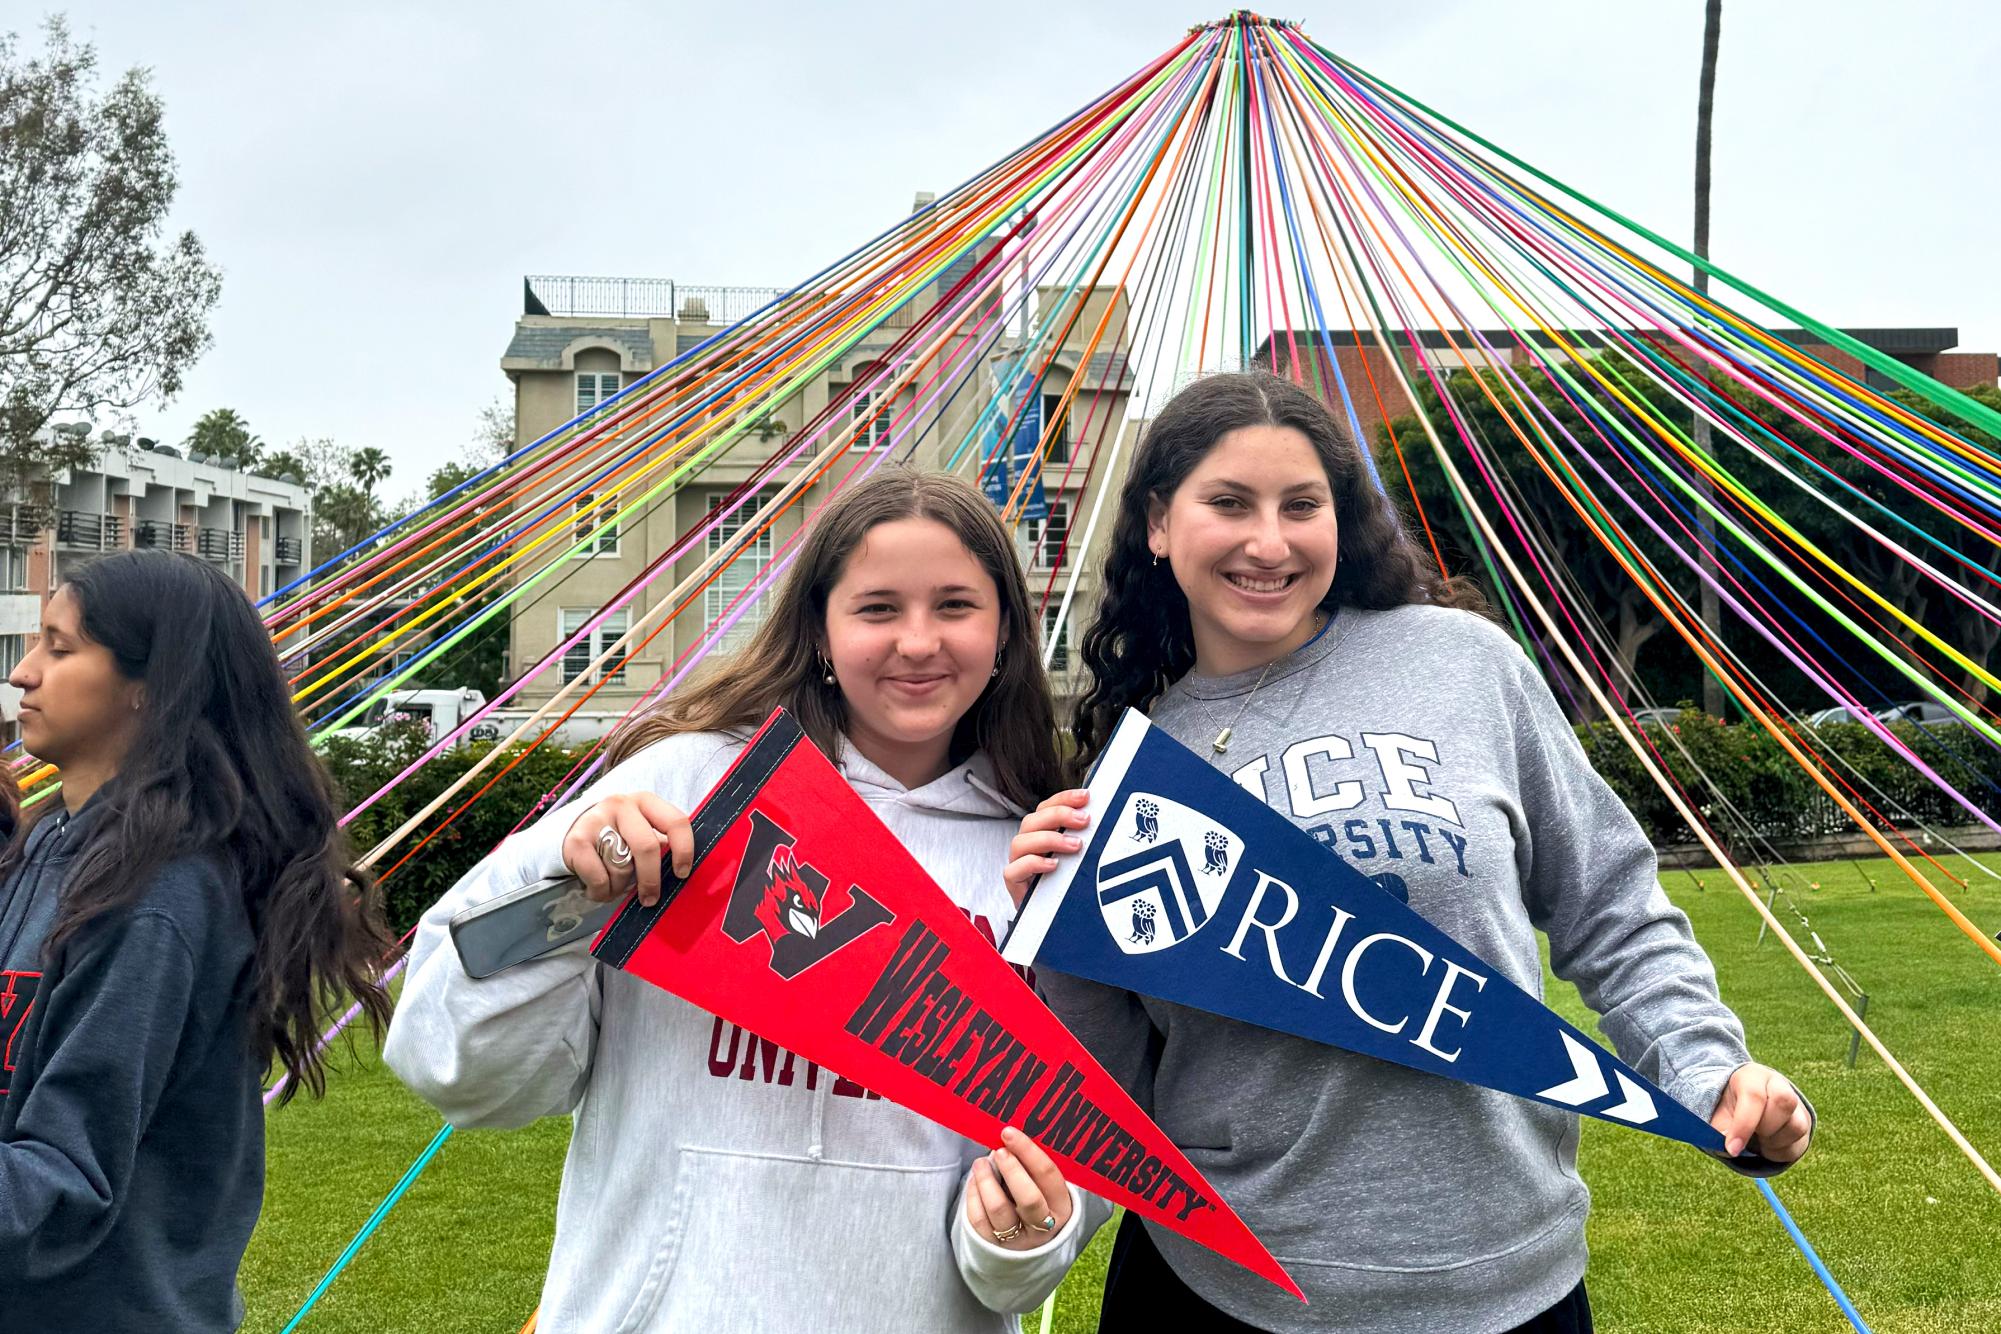 Seniors Annie Friedman and Lilly Dembo stand in front of the Maypole with their college pennants. Archer seniors had their pennant ceremony where they hung up their college pennants in the administration hallway on May 13. (Photo courtesy of Annie Friedman)